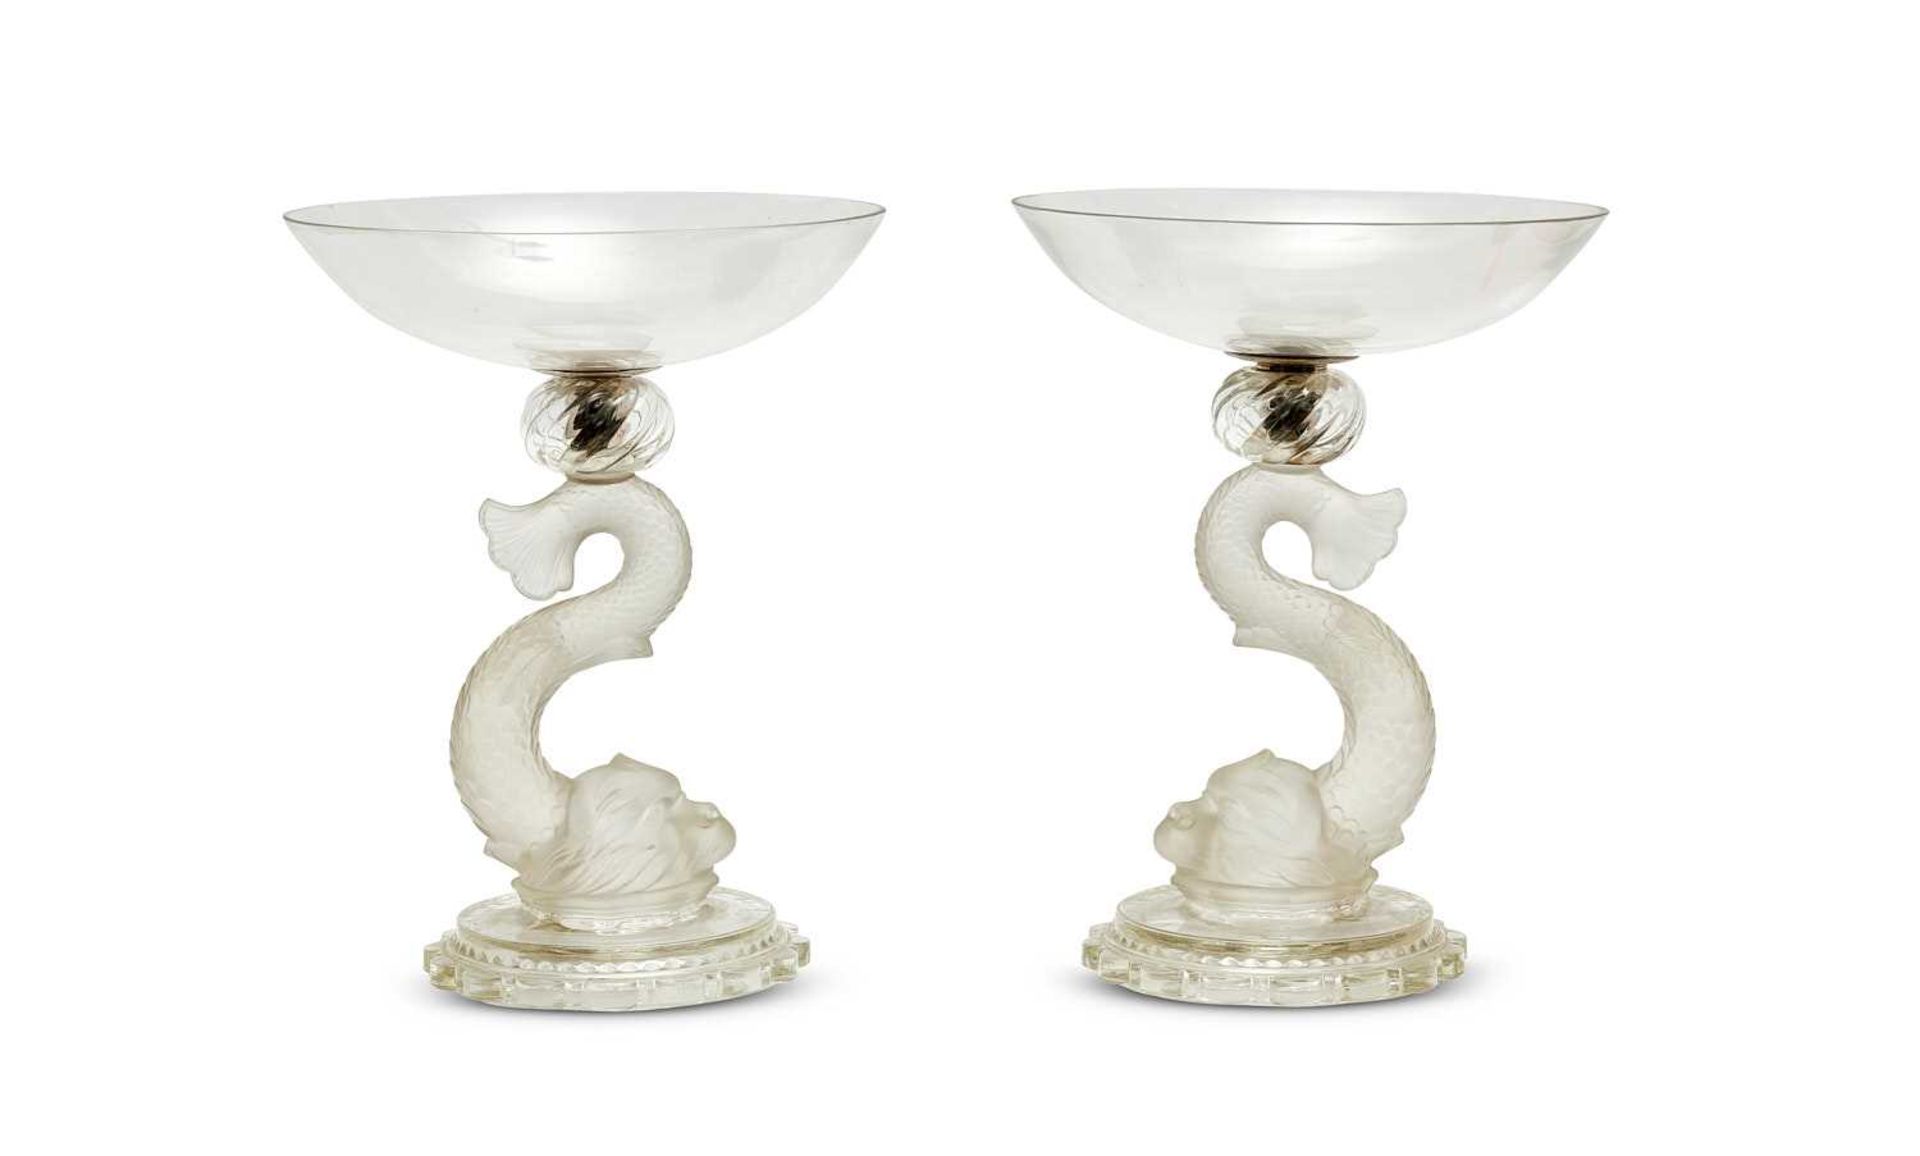 A PAIR OF BACCARAT STYLE GLASS DOLPHIN TAZZAS